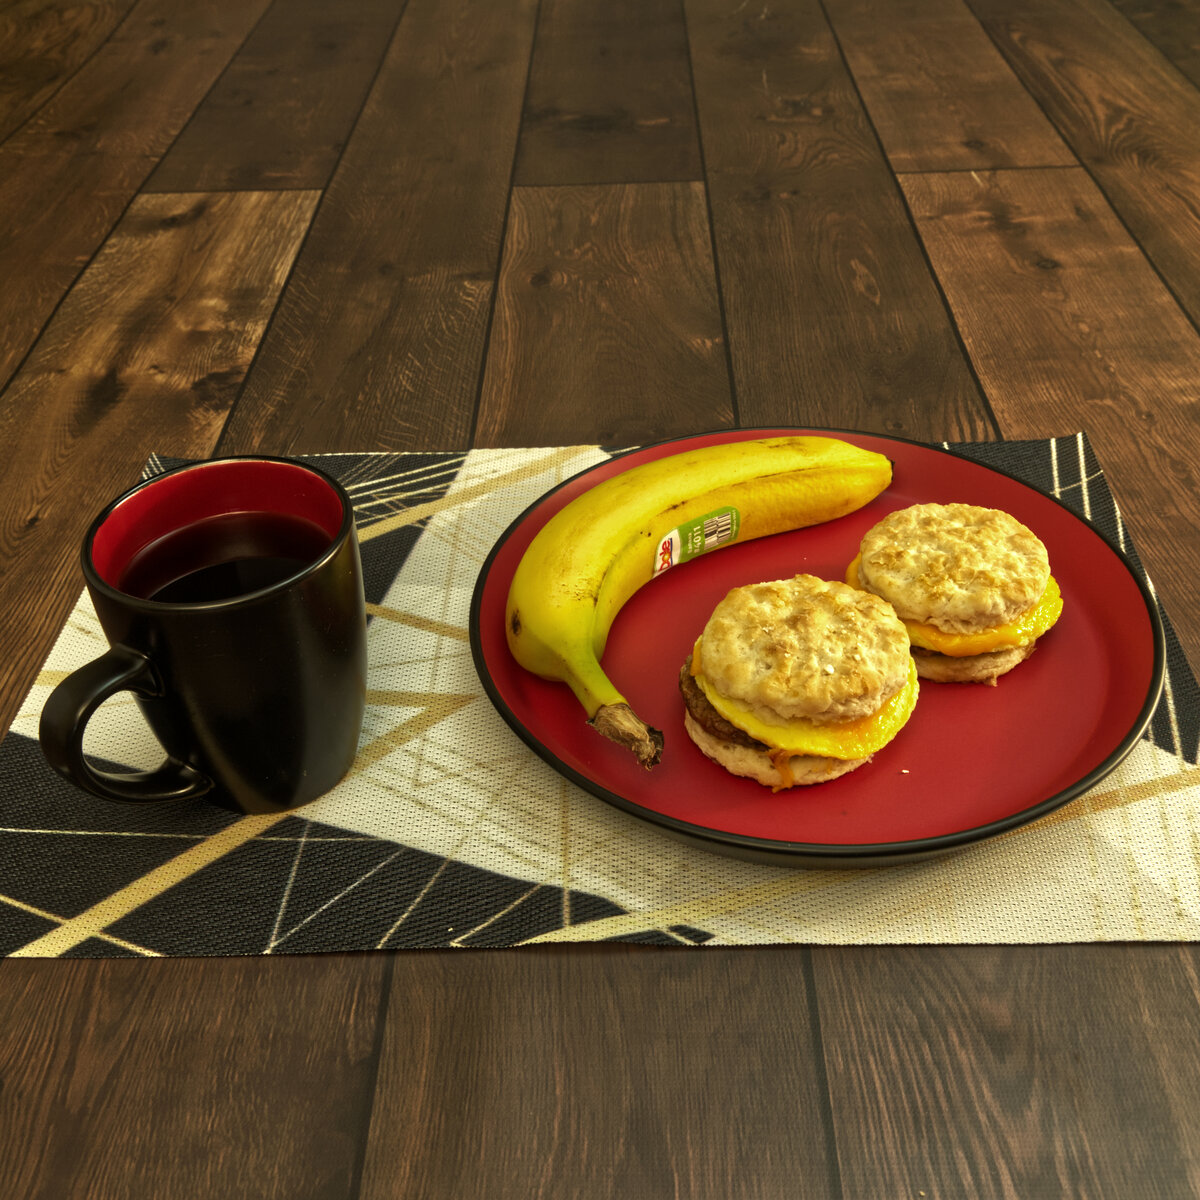 Sausage, Egg and Cheese Breakfast Biscuits, Banana and Coffee